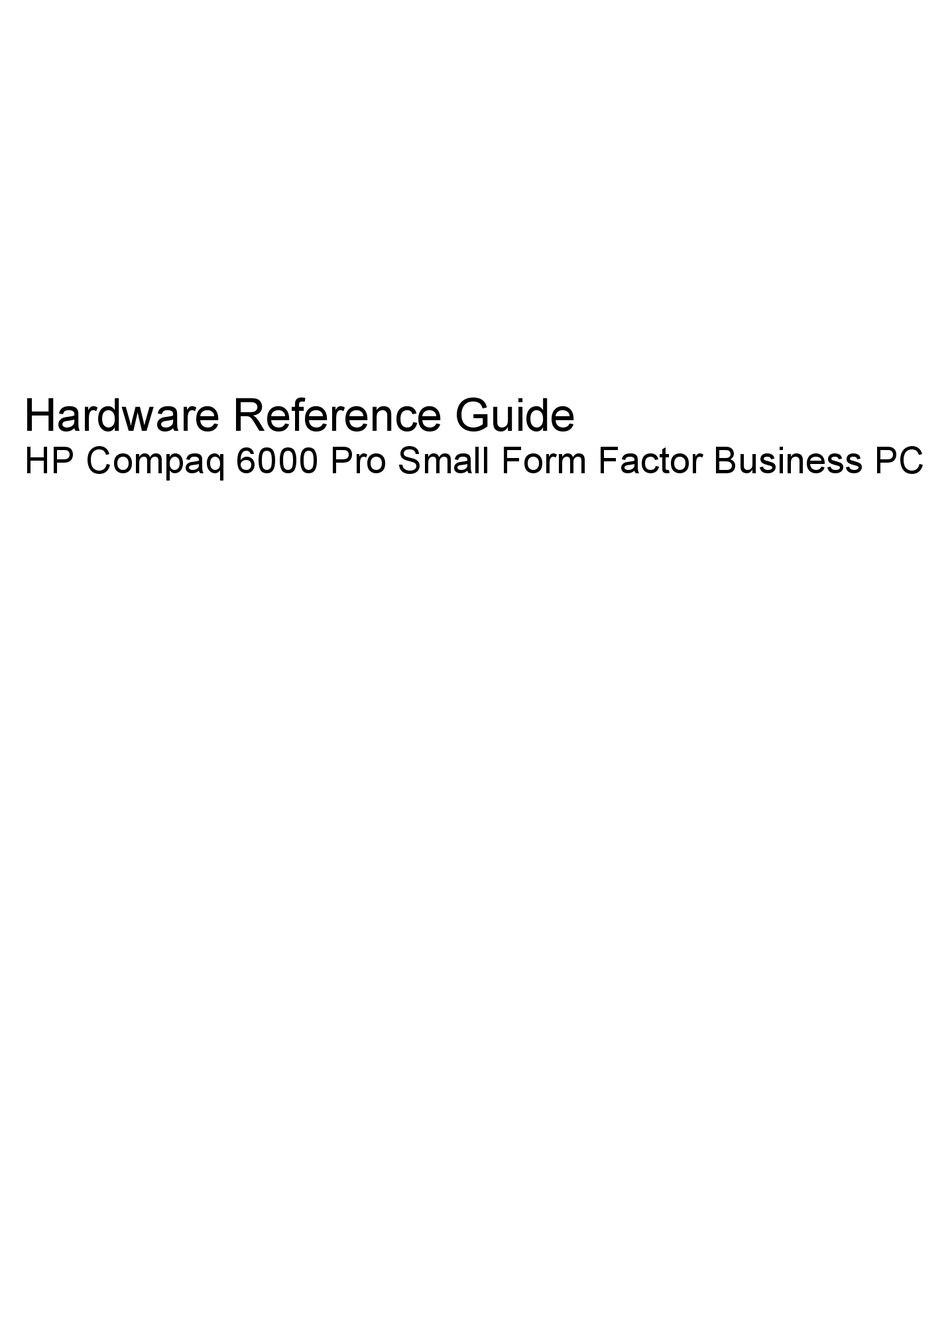 what is a pci serial port hp compaq 6000 pro